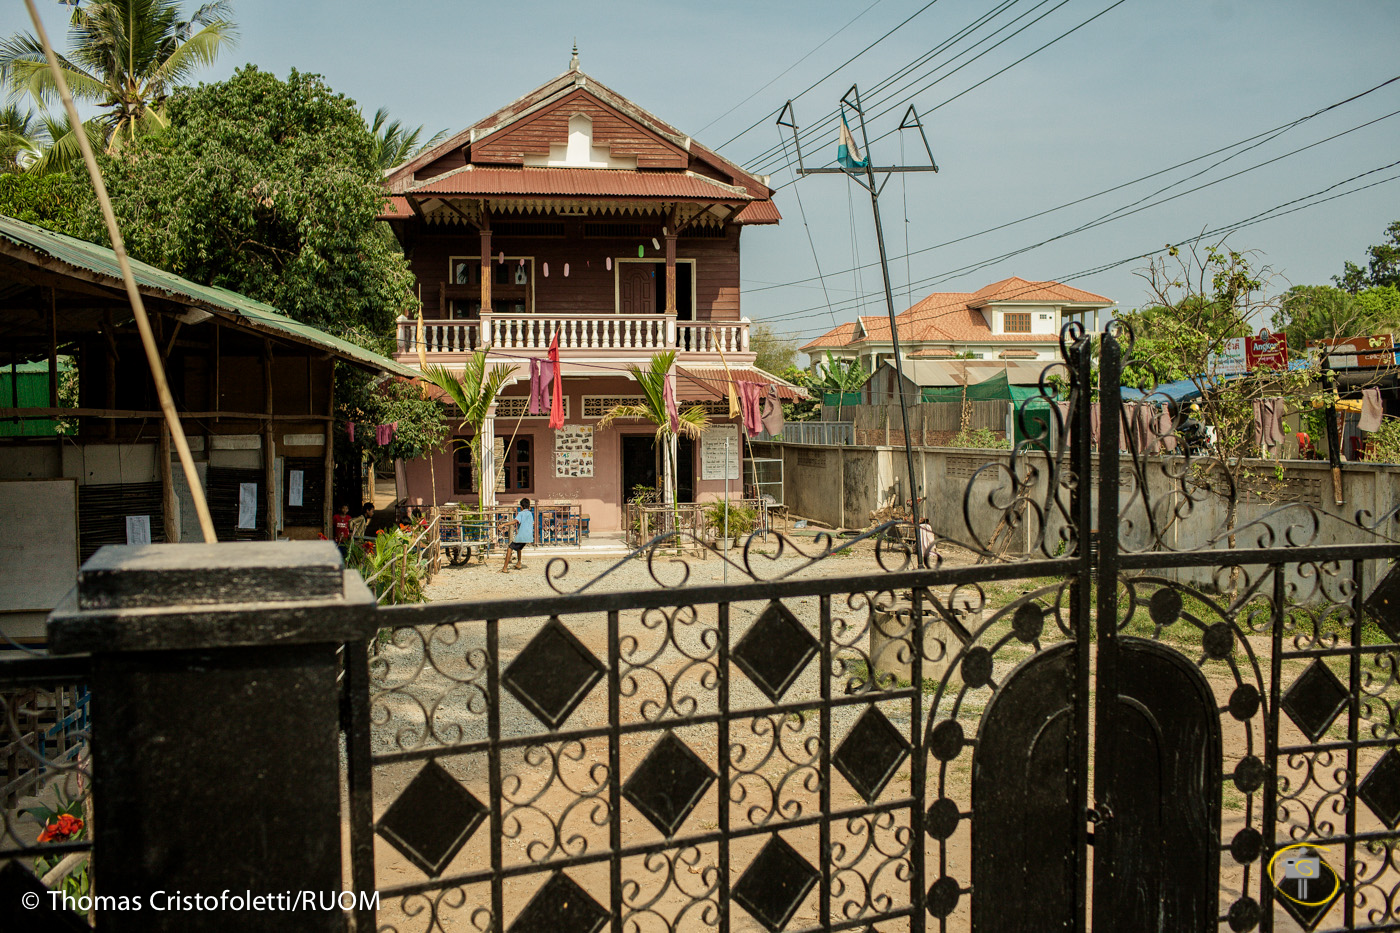 04/04/2013 - AOEO orphanage, a few km outside Siem Reap, whose director, Morn Savuth, has been involved last March in a case of sexual abuse towards two minors. @ Thomas Cristofoletti 2013